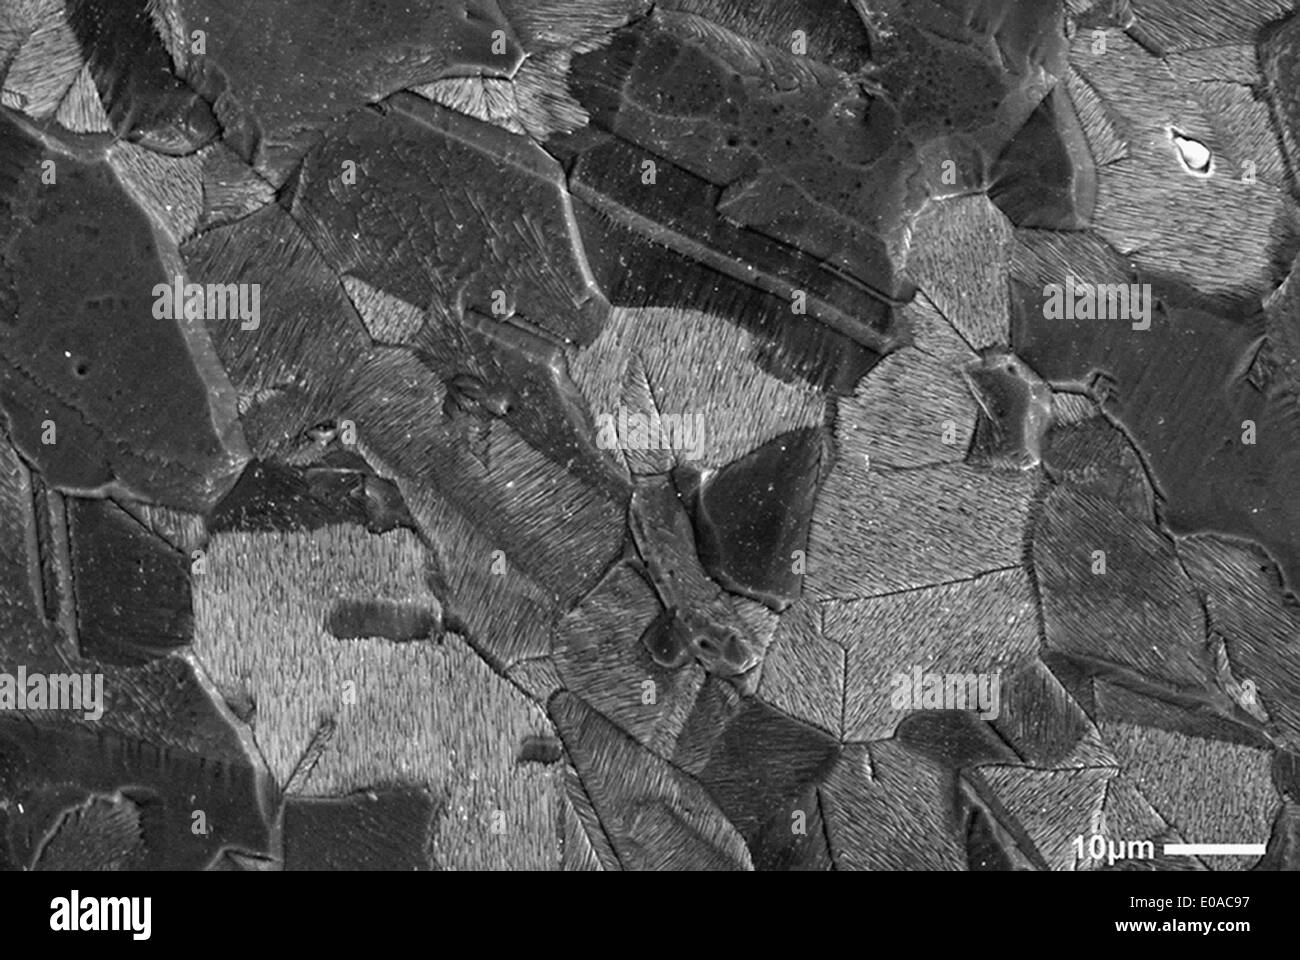 Scanning Electron Micrograph of fracture surface of stainless steel, rouged and etched sample Stock Photo